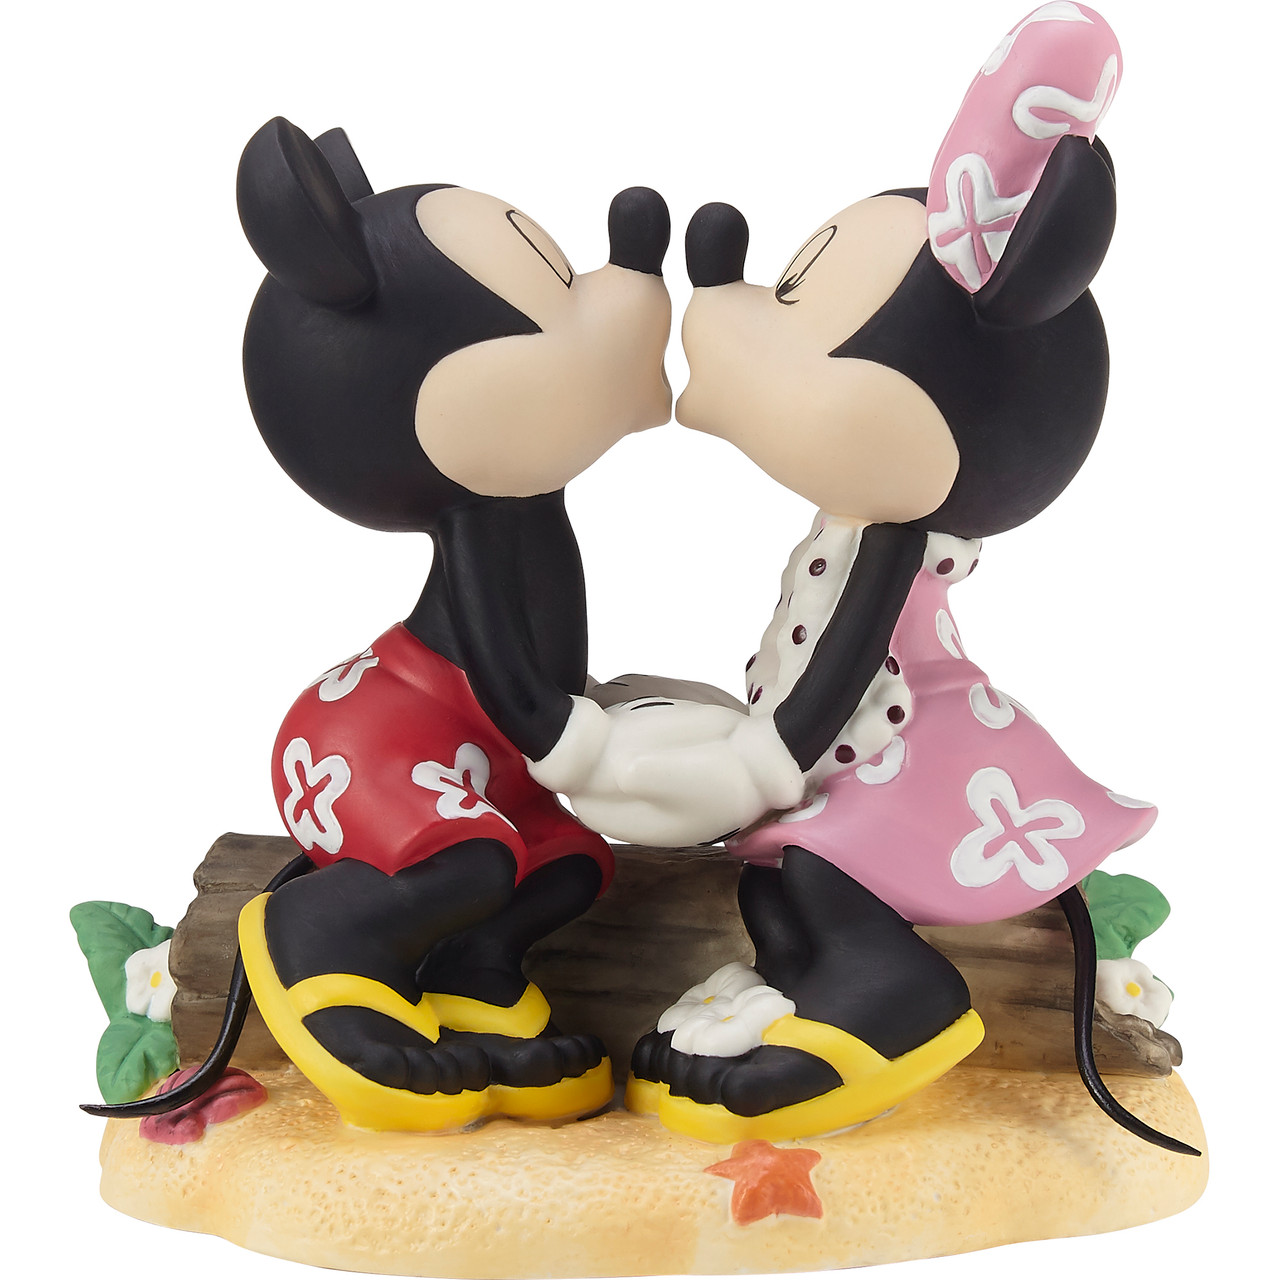 cute mickey and minnie mouse